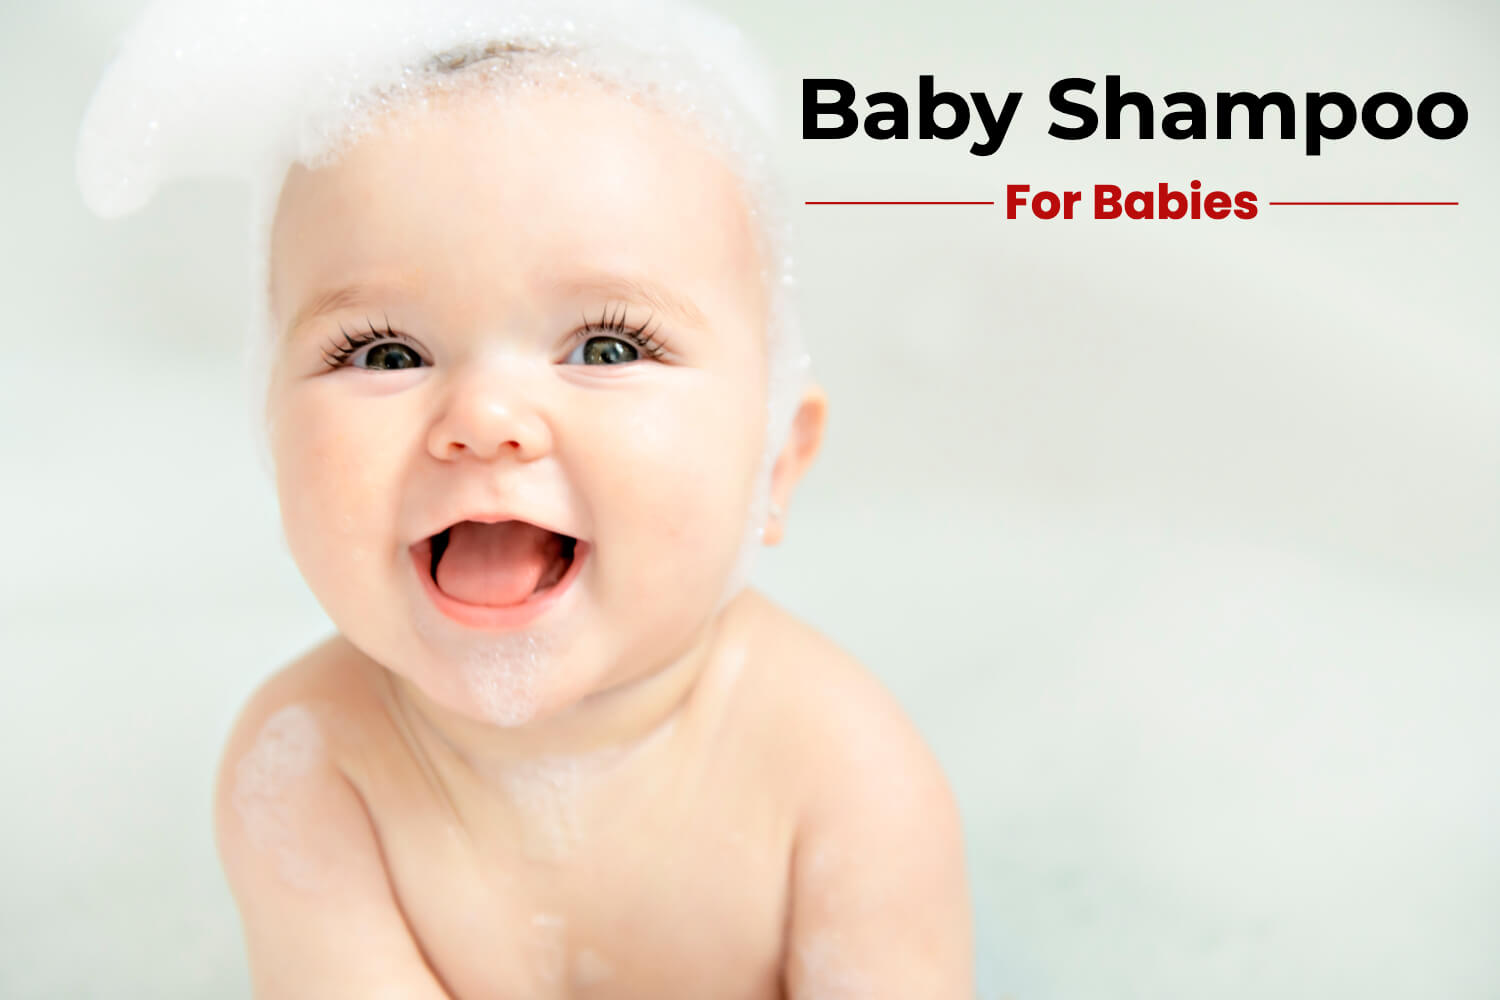 How To Choose the Right Baby Shampoo For Your Baby?